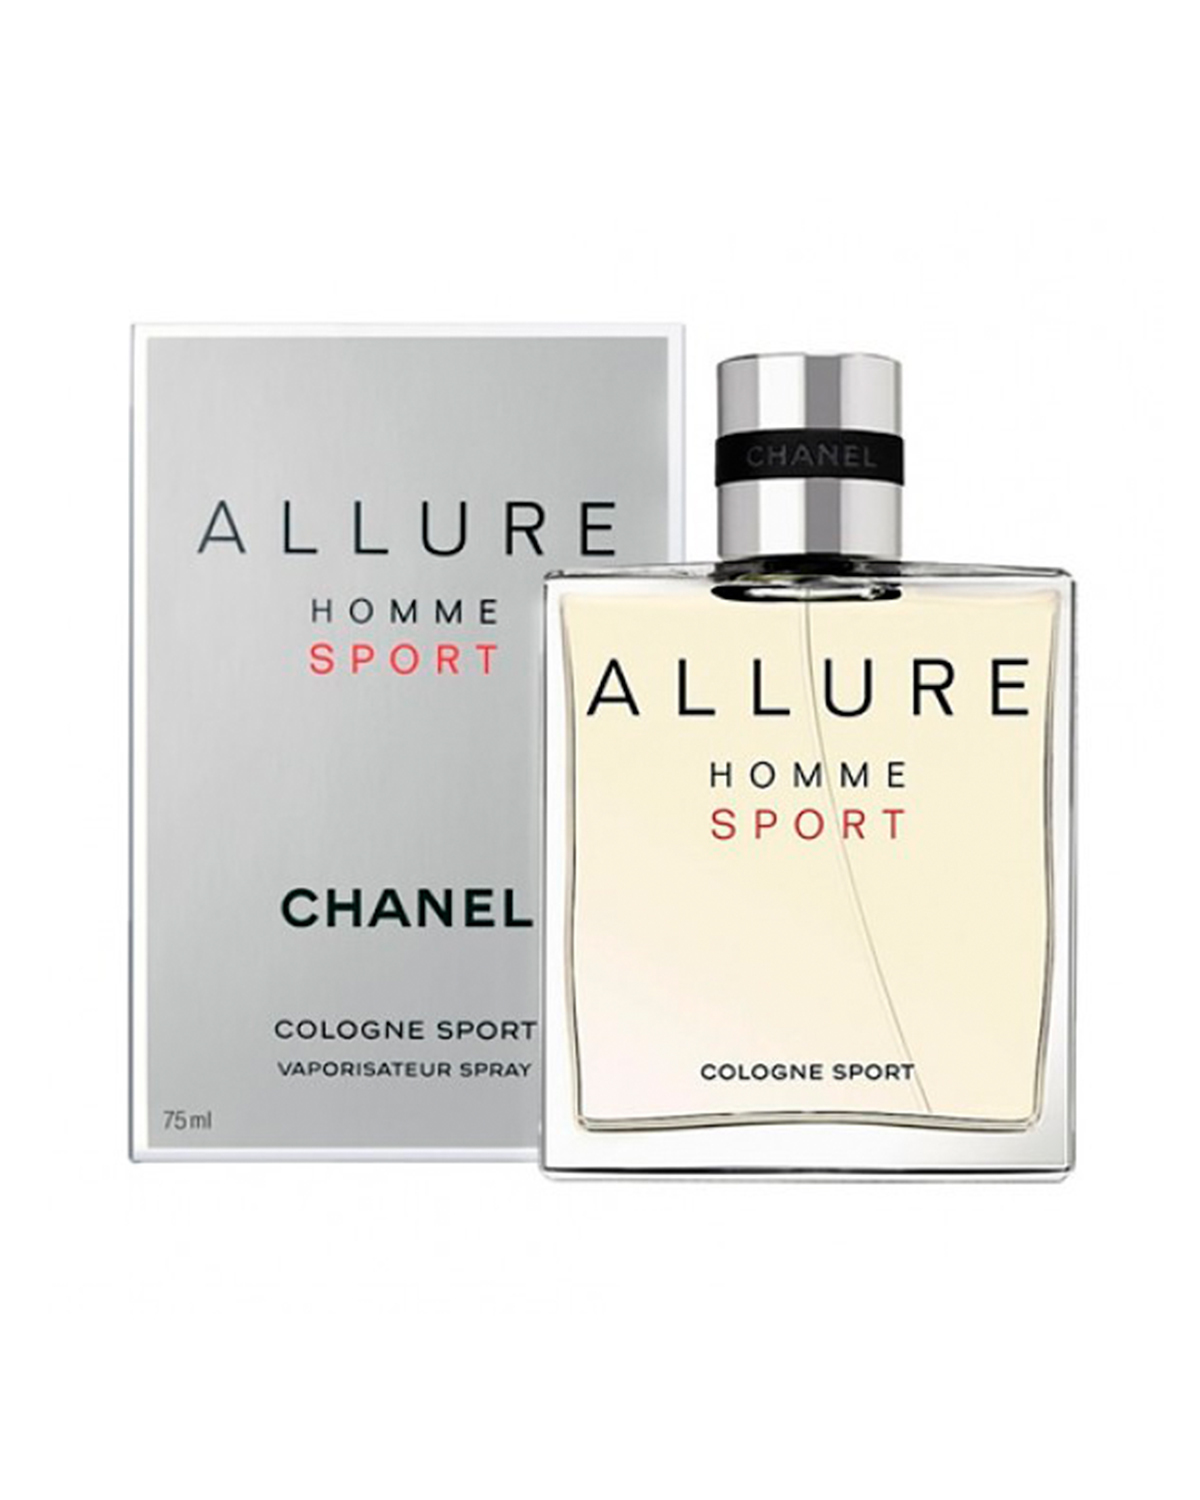 Allure homme cologne